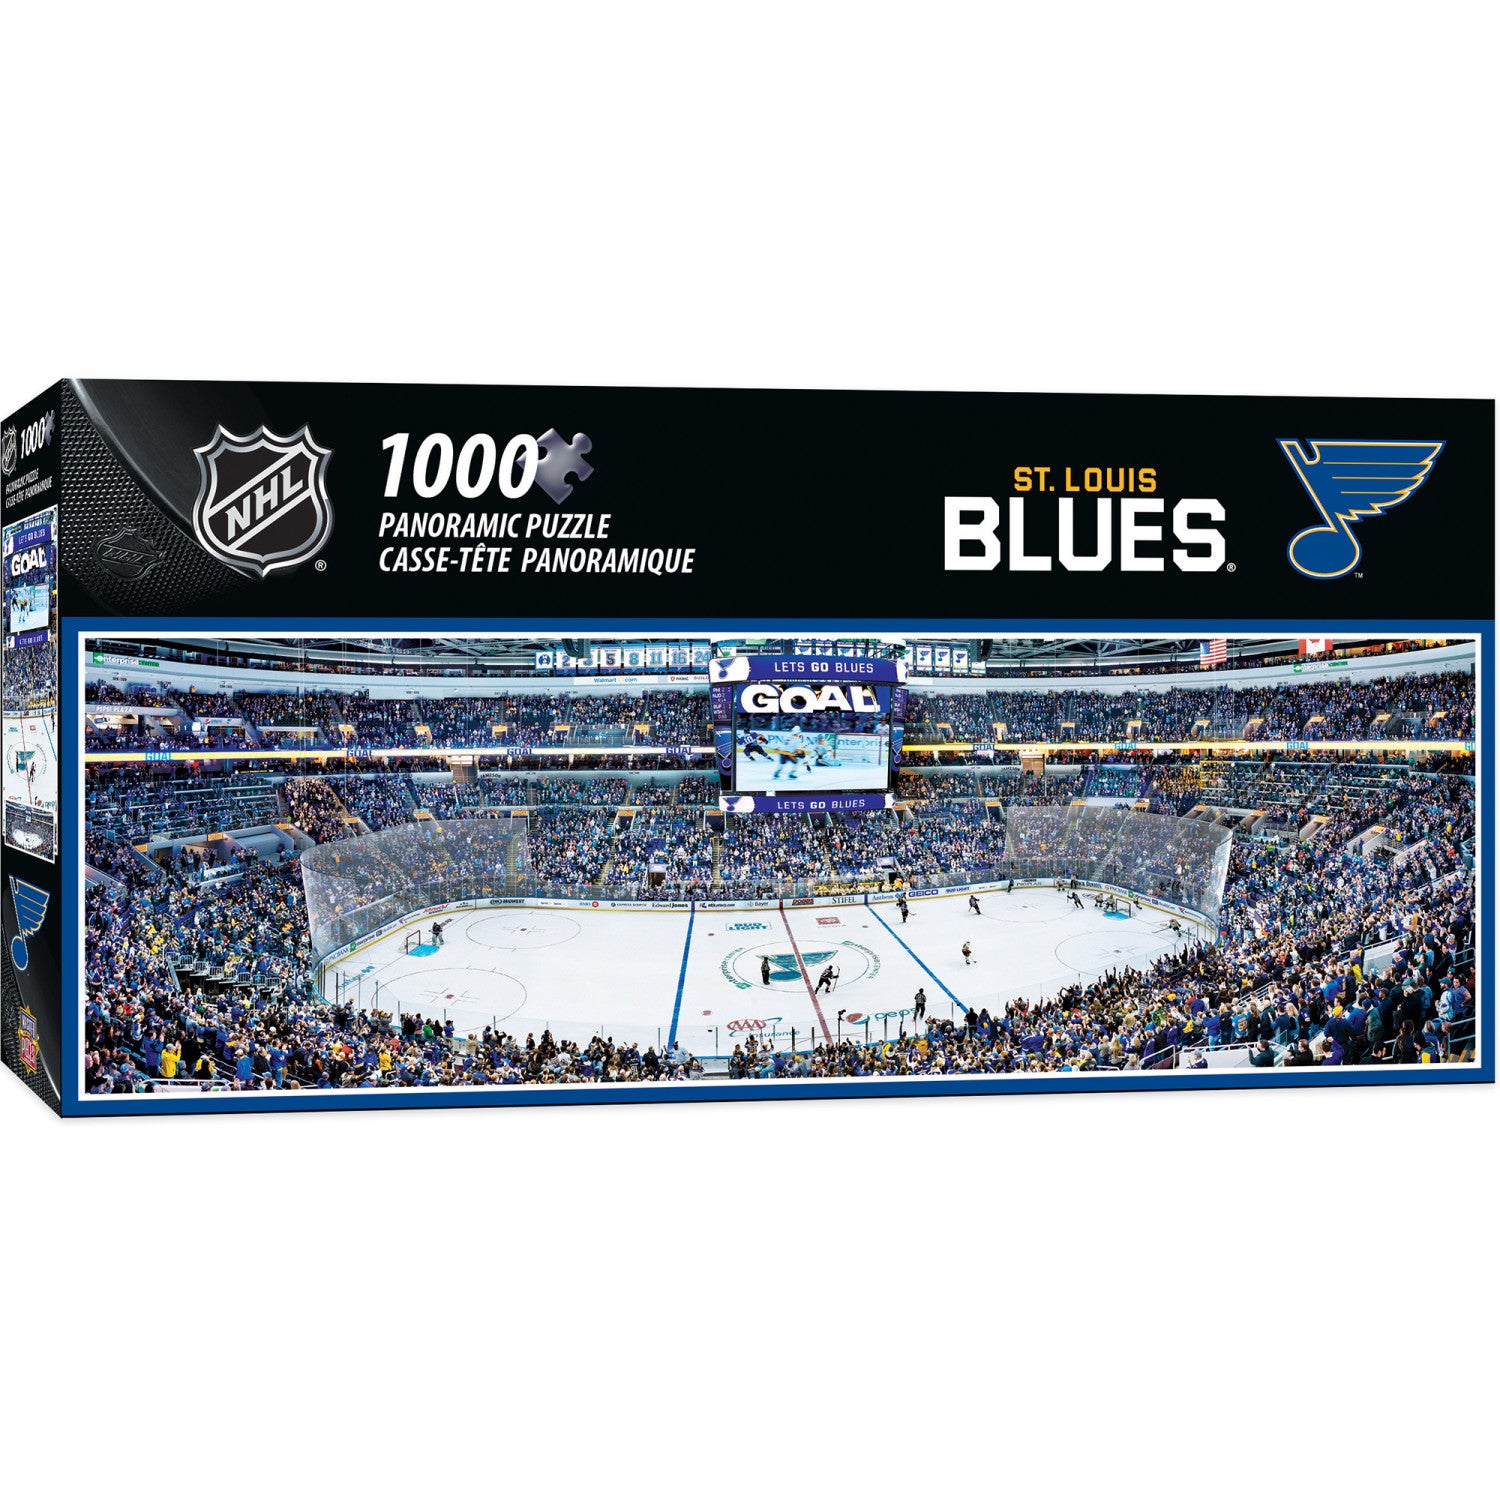 St. Louis Blues - 1000 Piece Panoramic Jigsaw Puzzle